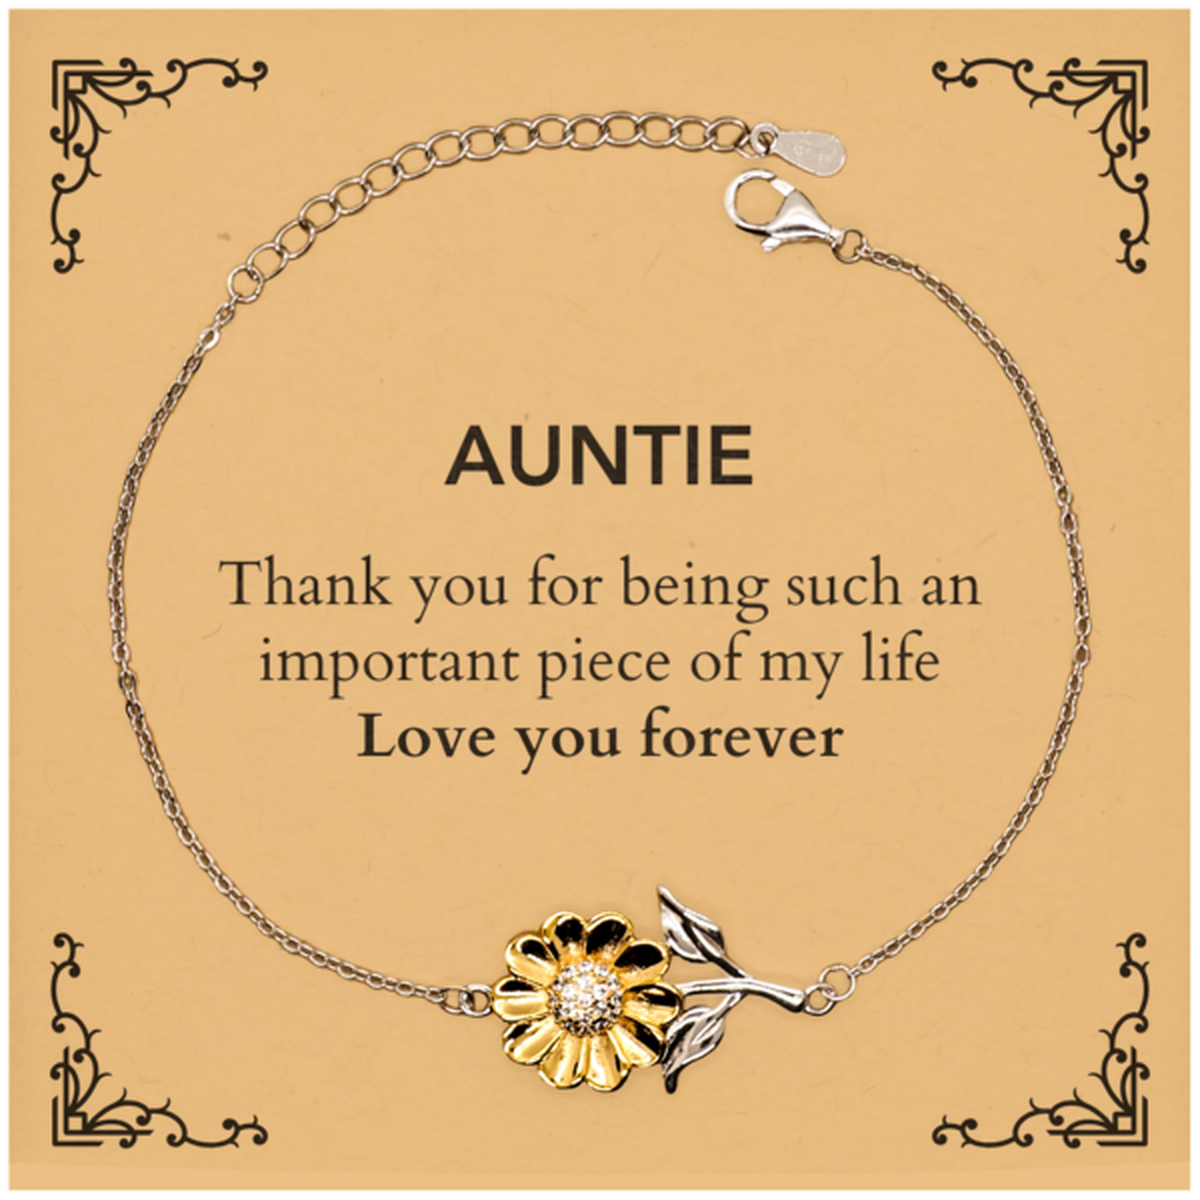 Appropriate Auntie Sunflower Bracelet Epic Birthday Gifts for Auntie Thank you for being such an important piece of my life Auntie Christmas Mothers Fathers Day